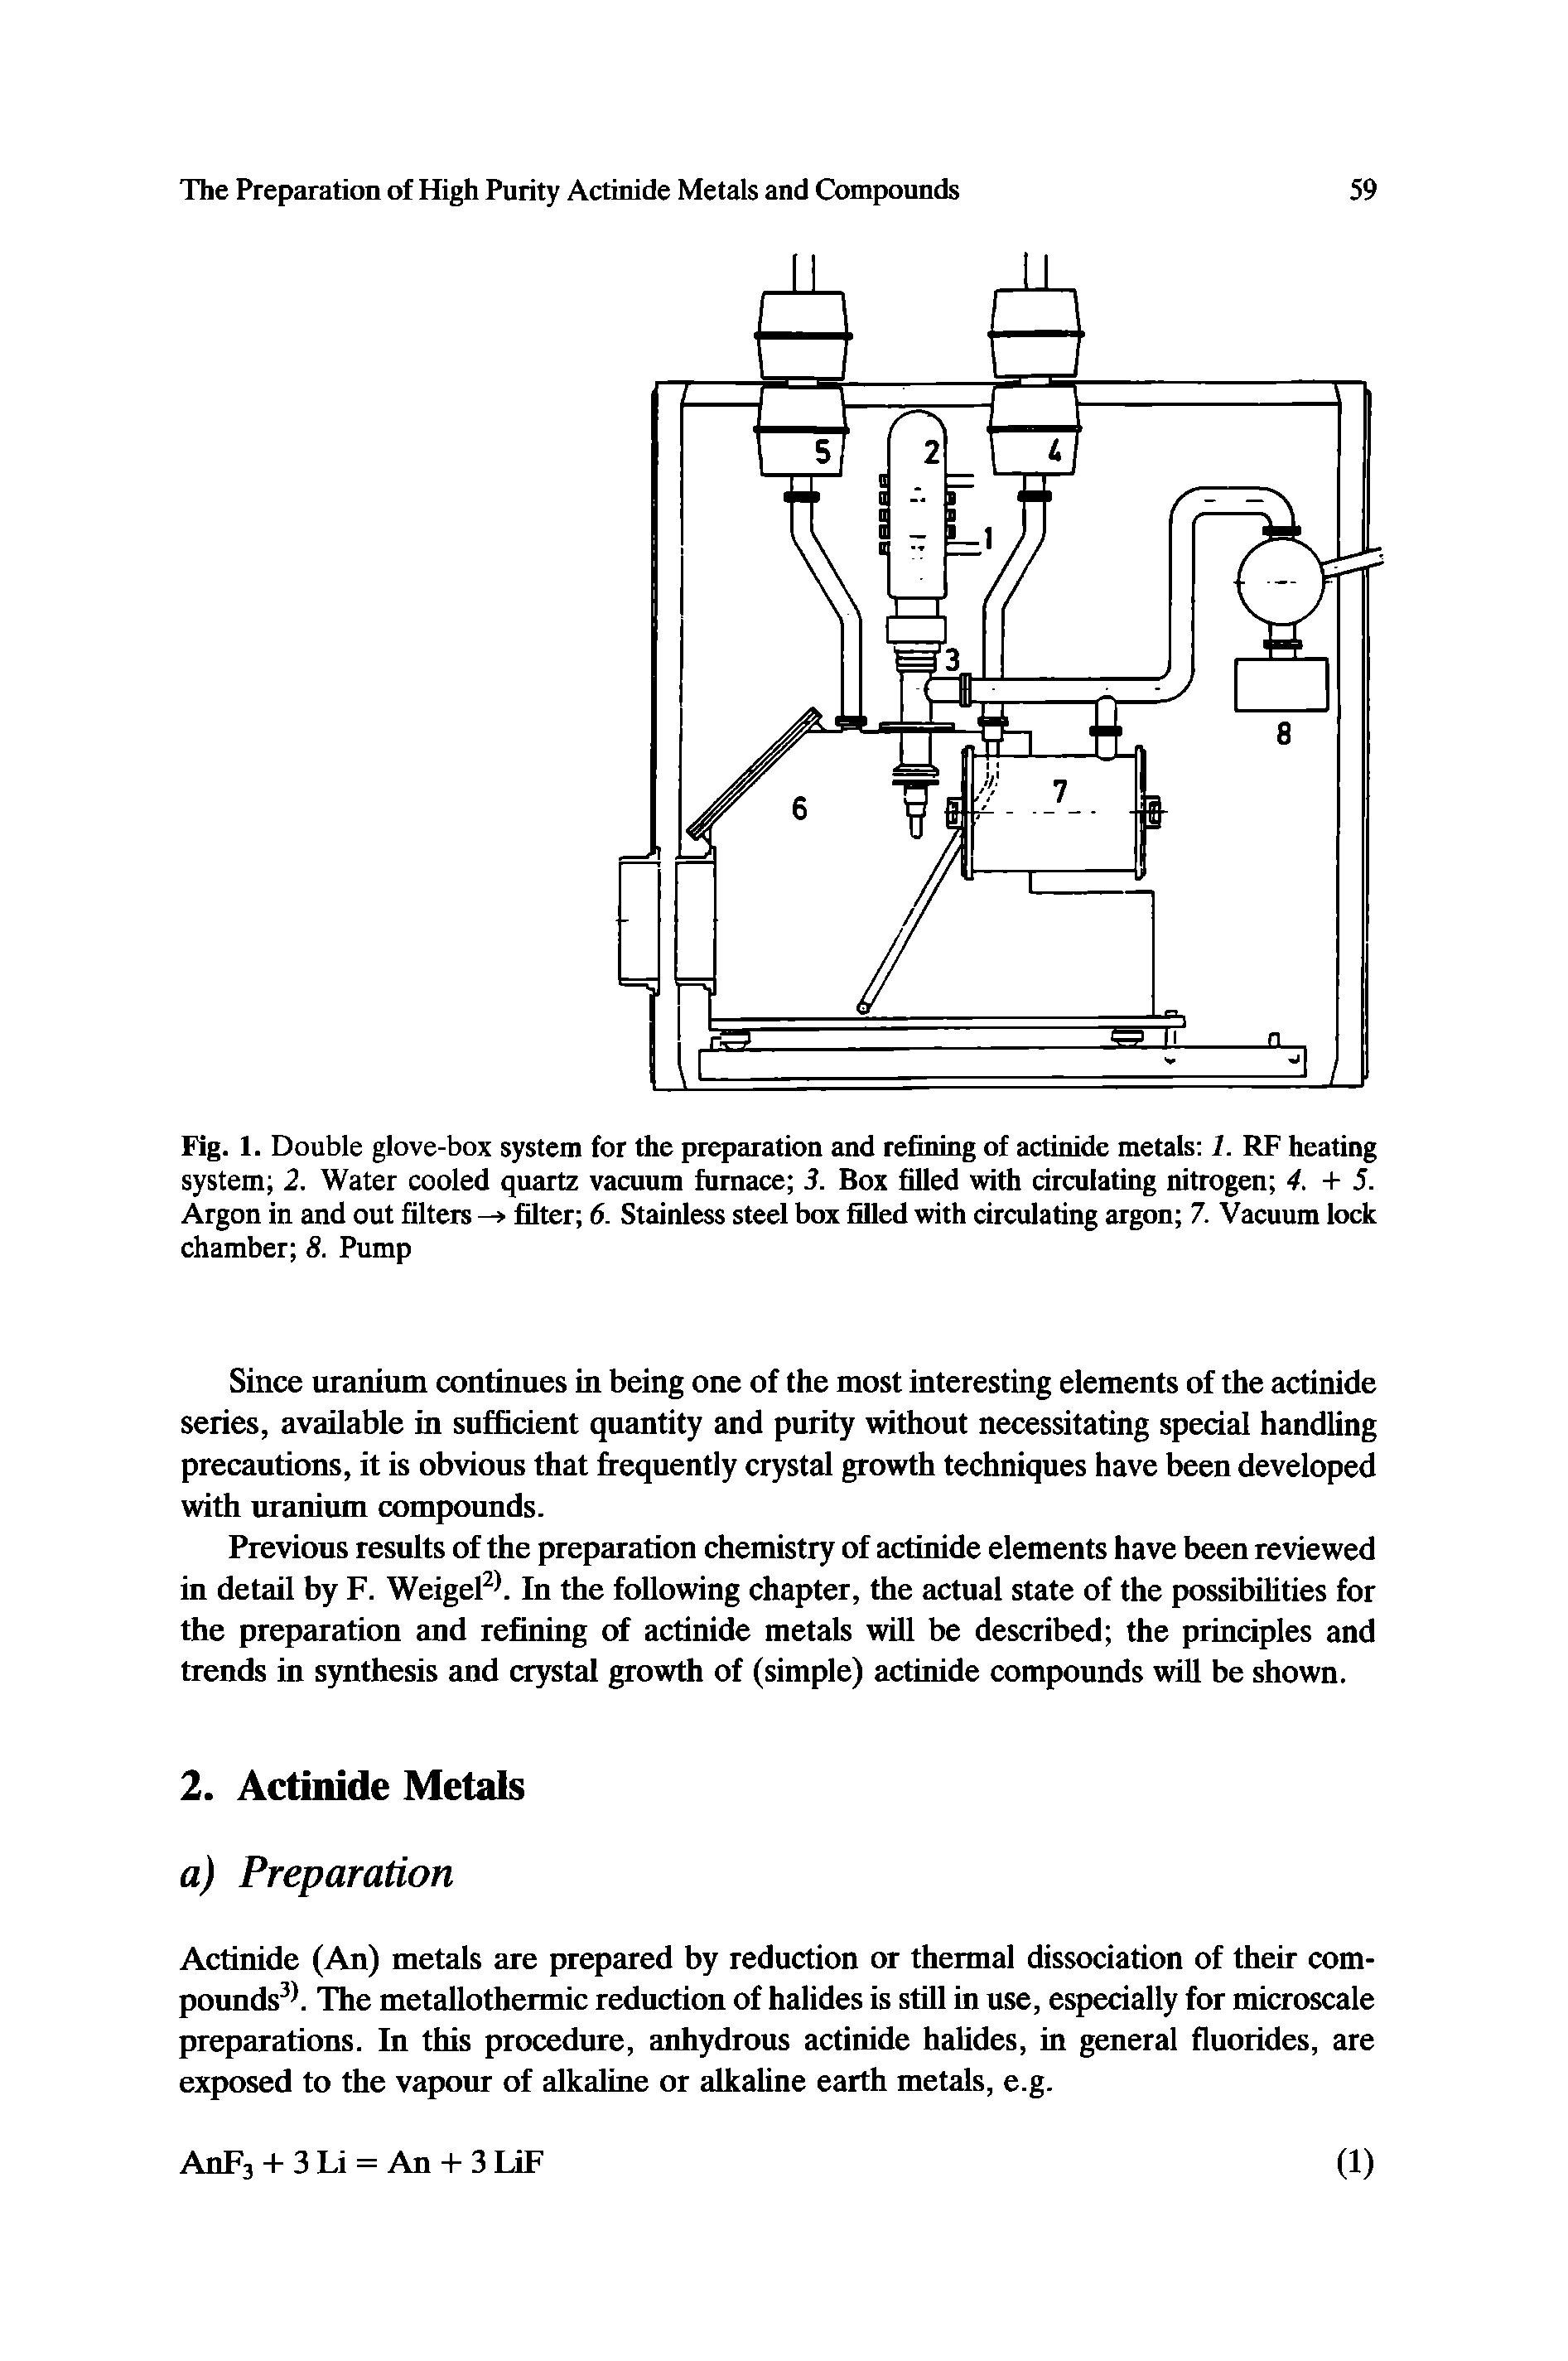 Fig. 1. Double glove-box system for the preparation and refining of actinide metals 1. RF heating system 2. Water cooled quartz vacuum furnace 3. Box filled with circulating nitrogen 4. -I- 5. Argon in and out filters filter 6. Stainless steel box filled with circulating argon 7. Vacuum lock chamber 8. Pump...